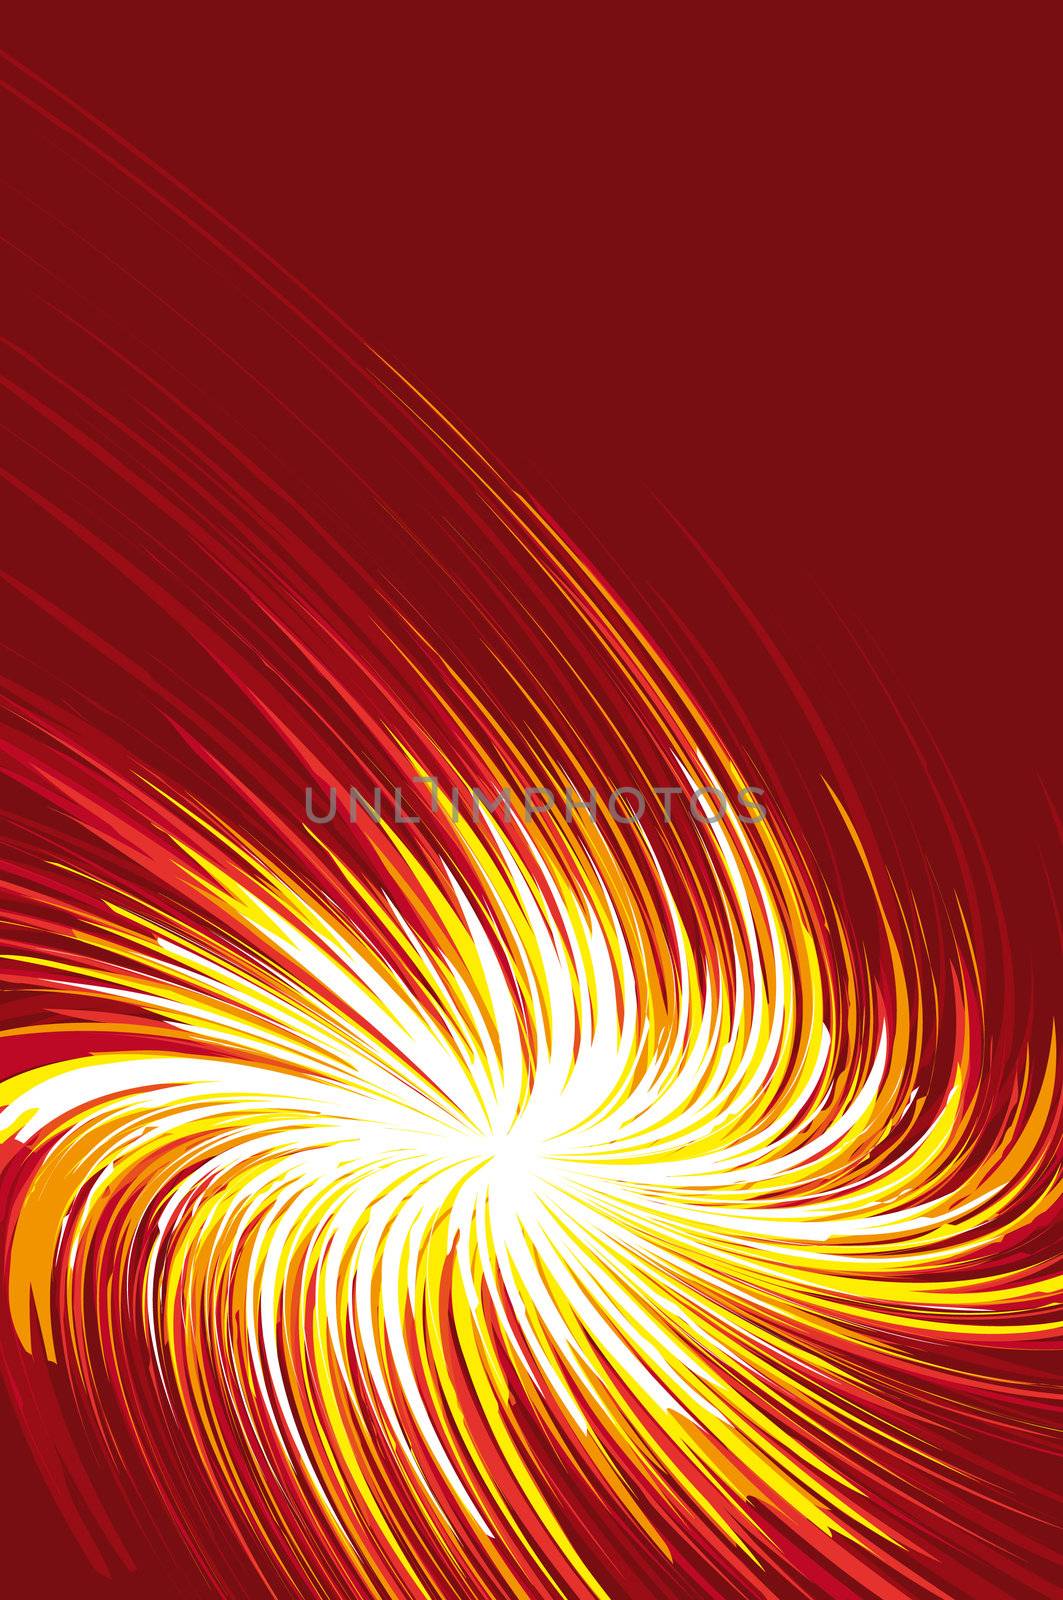 explosion of light with curved lines
